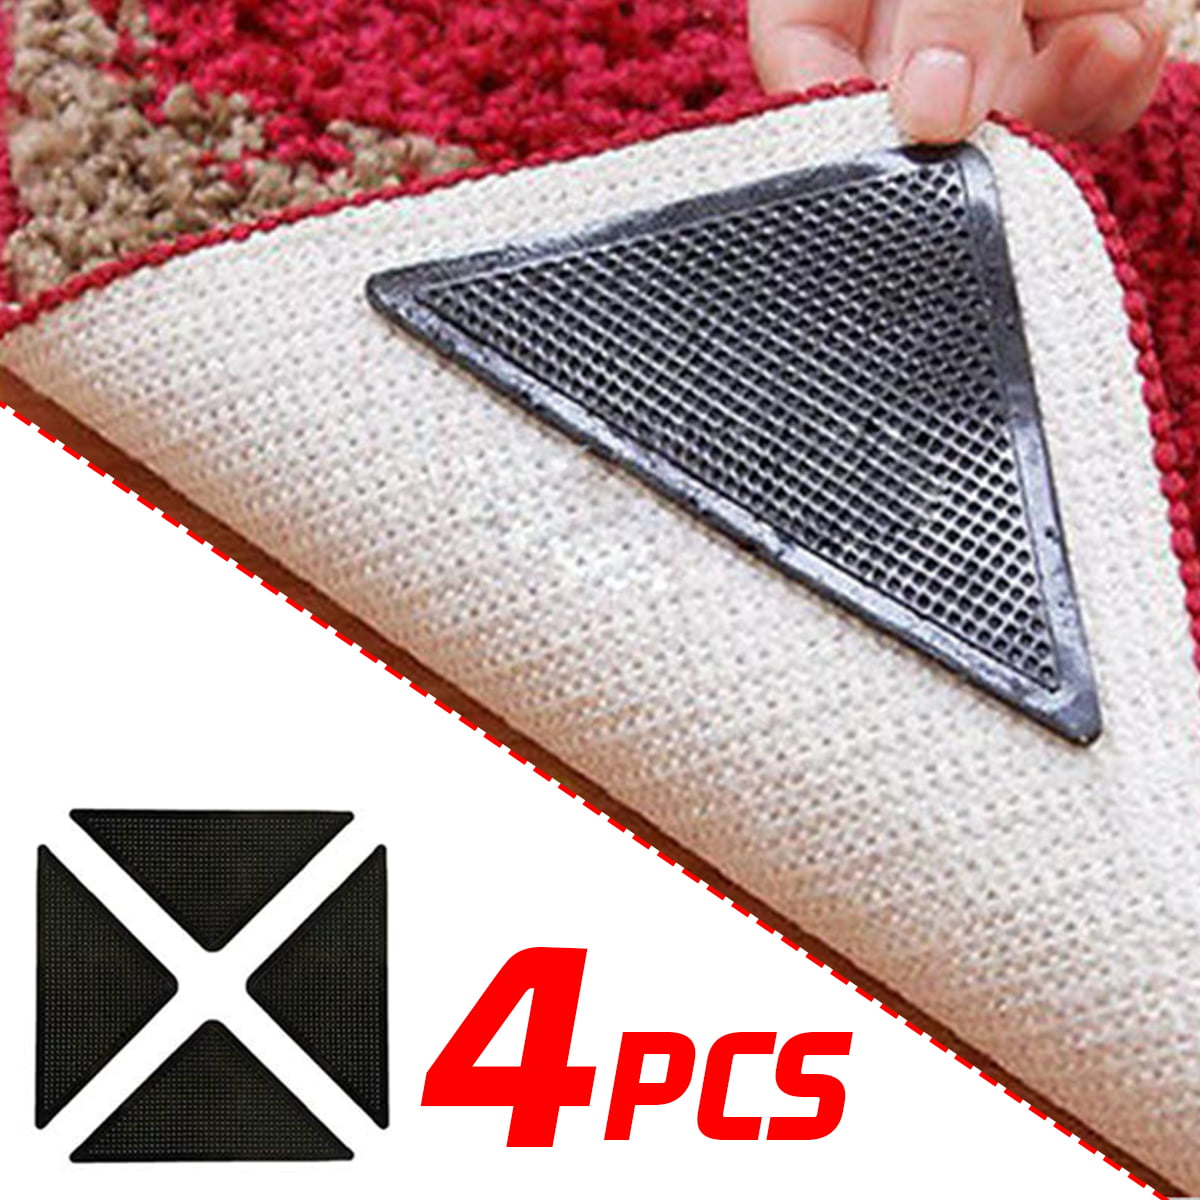 5 x Rug Gripper Pad Anti Curling Non Slip Carpet Anchors Washable Holders S G1I6 